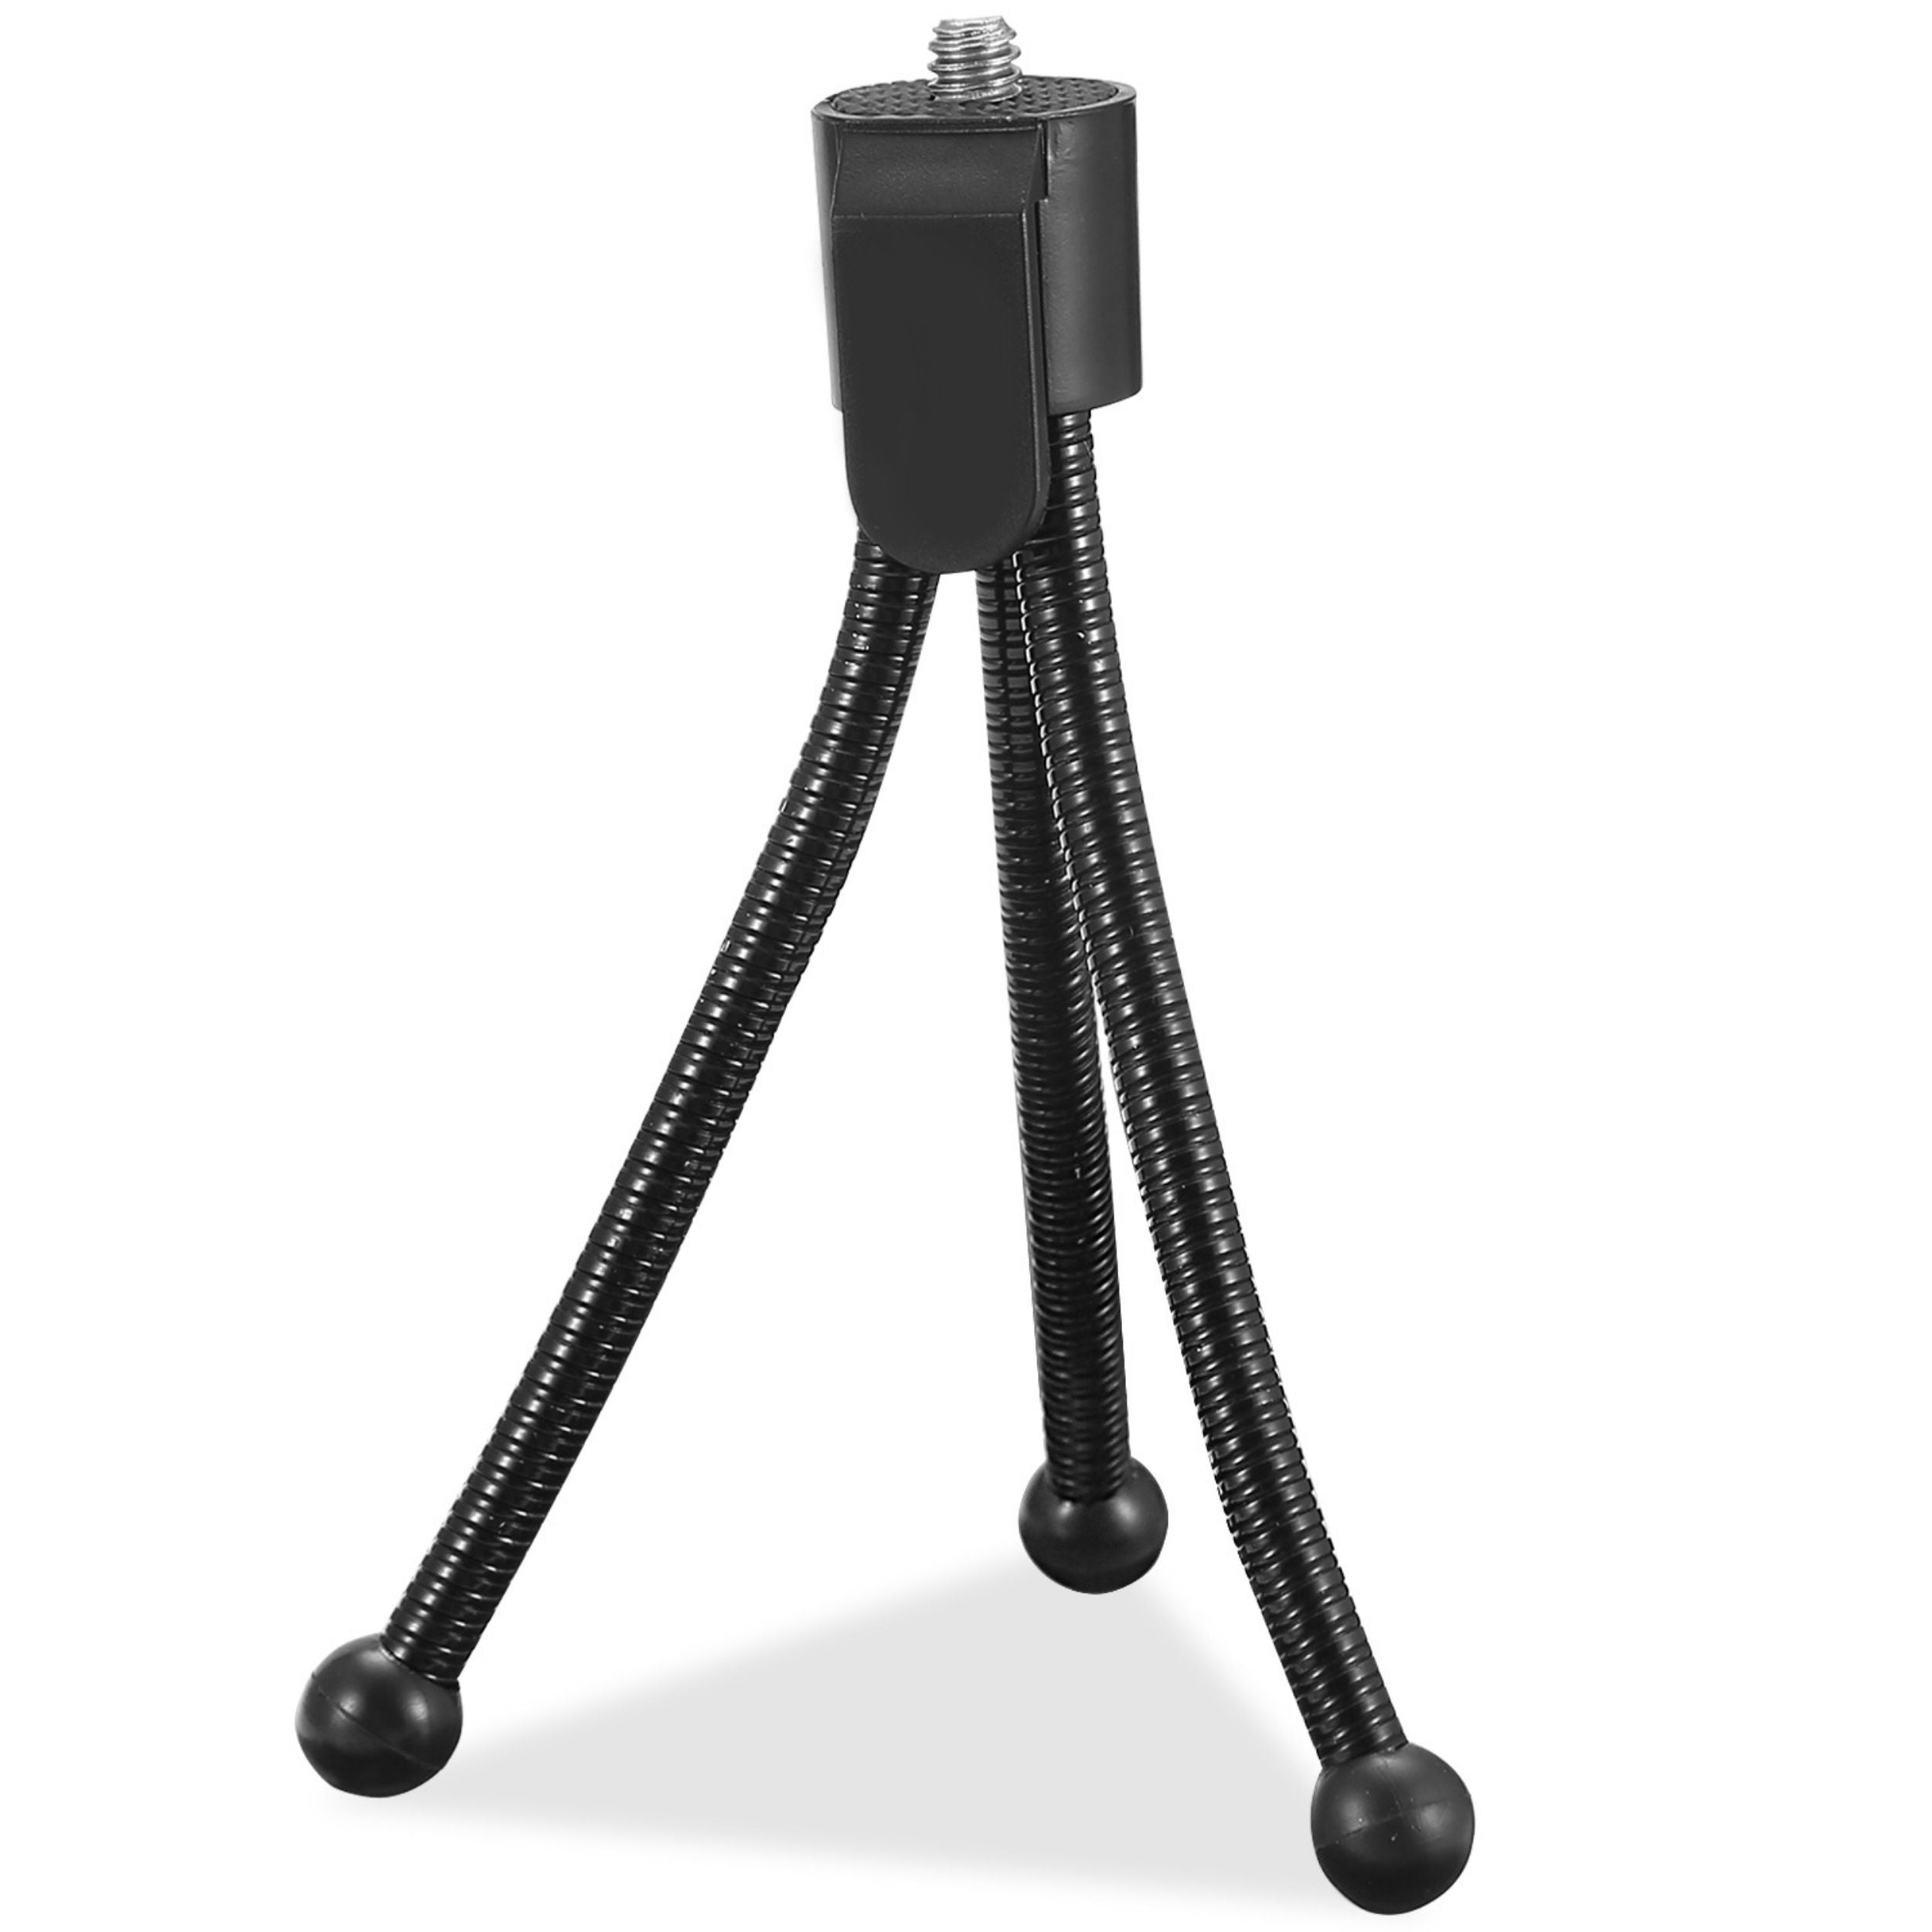 title:Flexible Tripod Stand for Camera & Mini Projector - Heavy Duty Tabletop Mount with Anti-Slip Feet - Ideal for Photography & Video Recording;color:Black